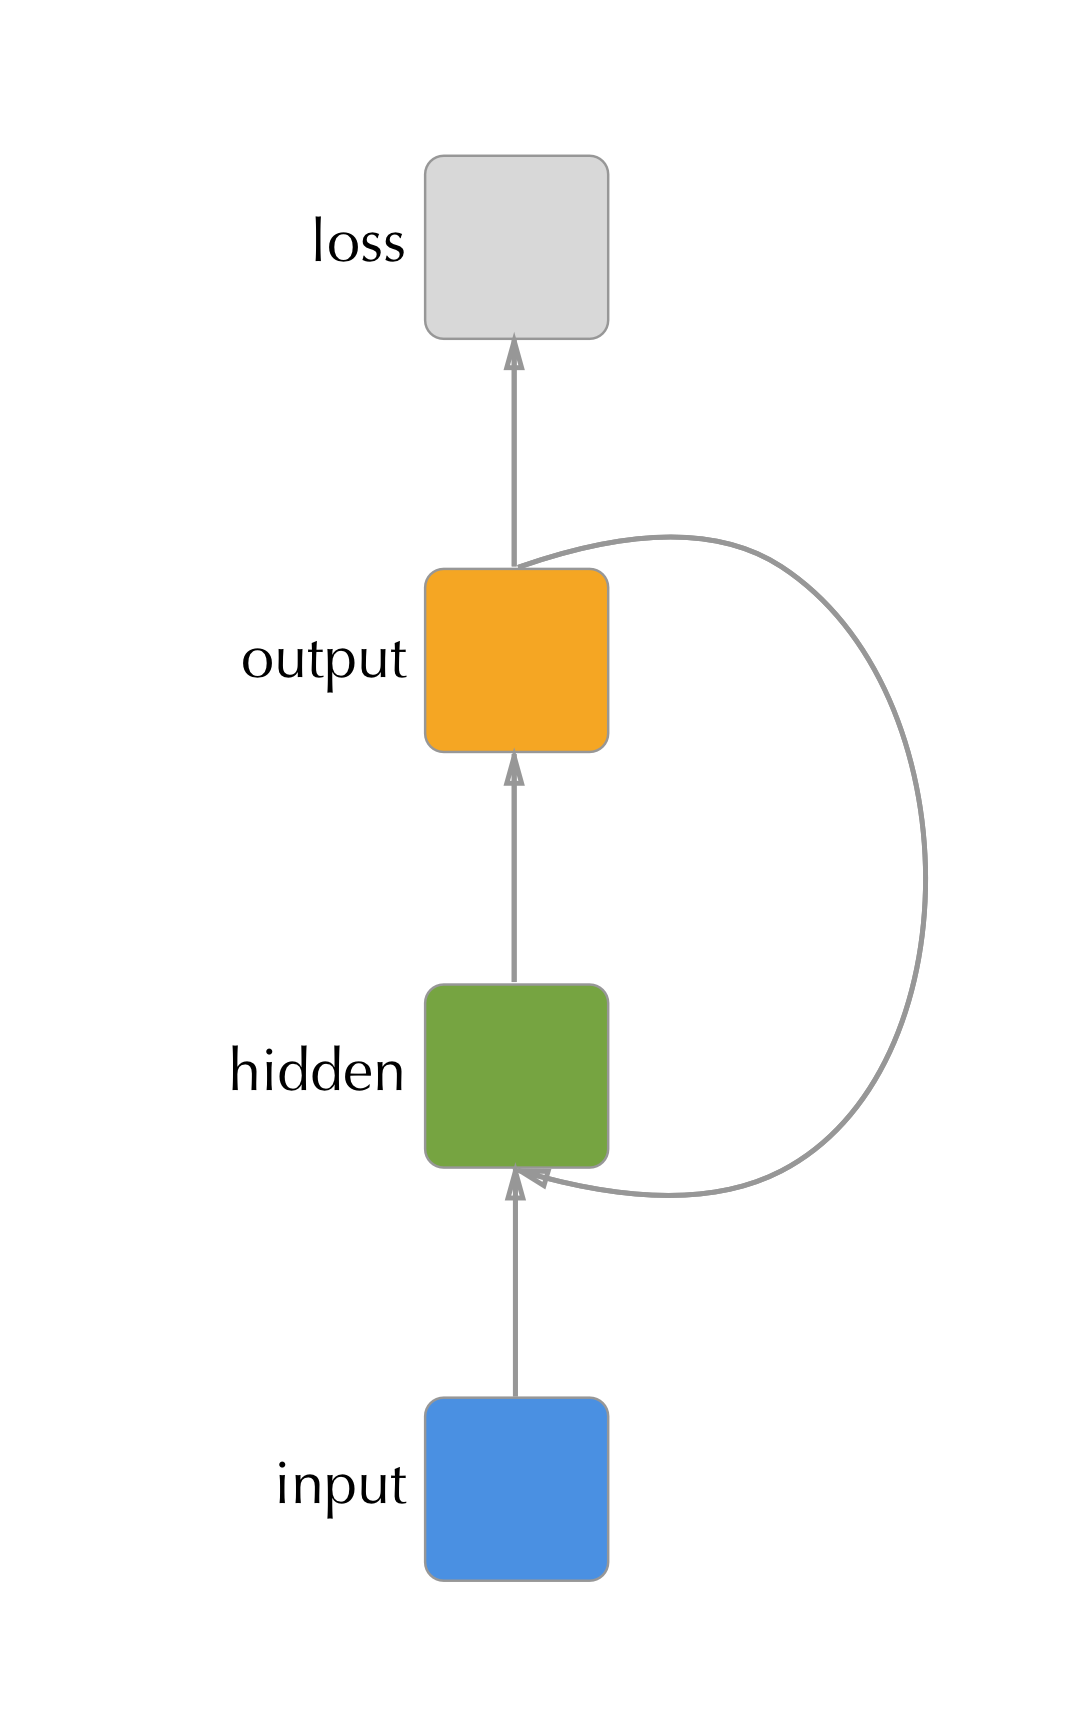 An RNN where the recurrent connection is made between the previous timepoint's output and the hidden unit. This model is less expressive than the traditional hidden - hidden architecture but is much easier to train.